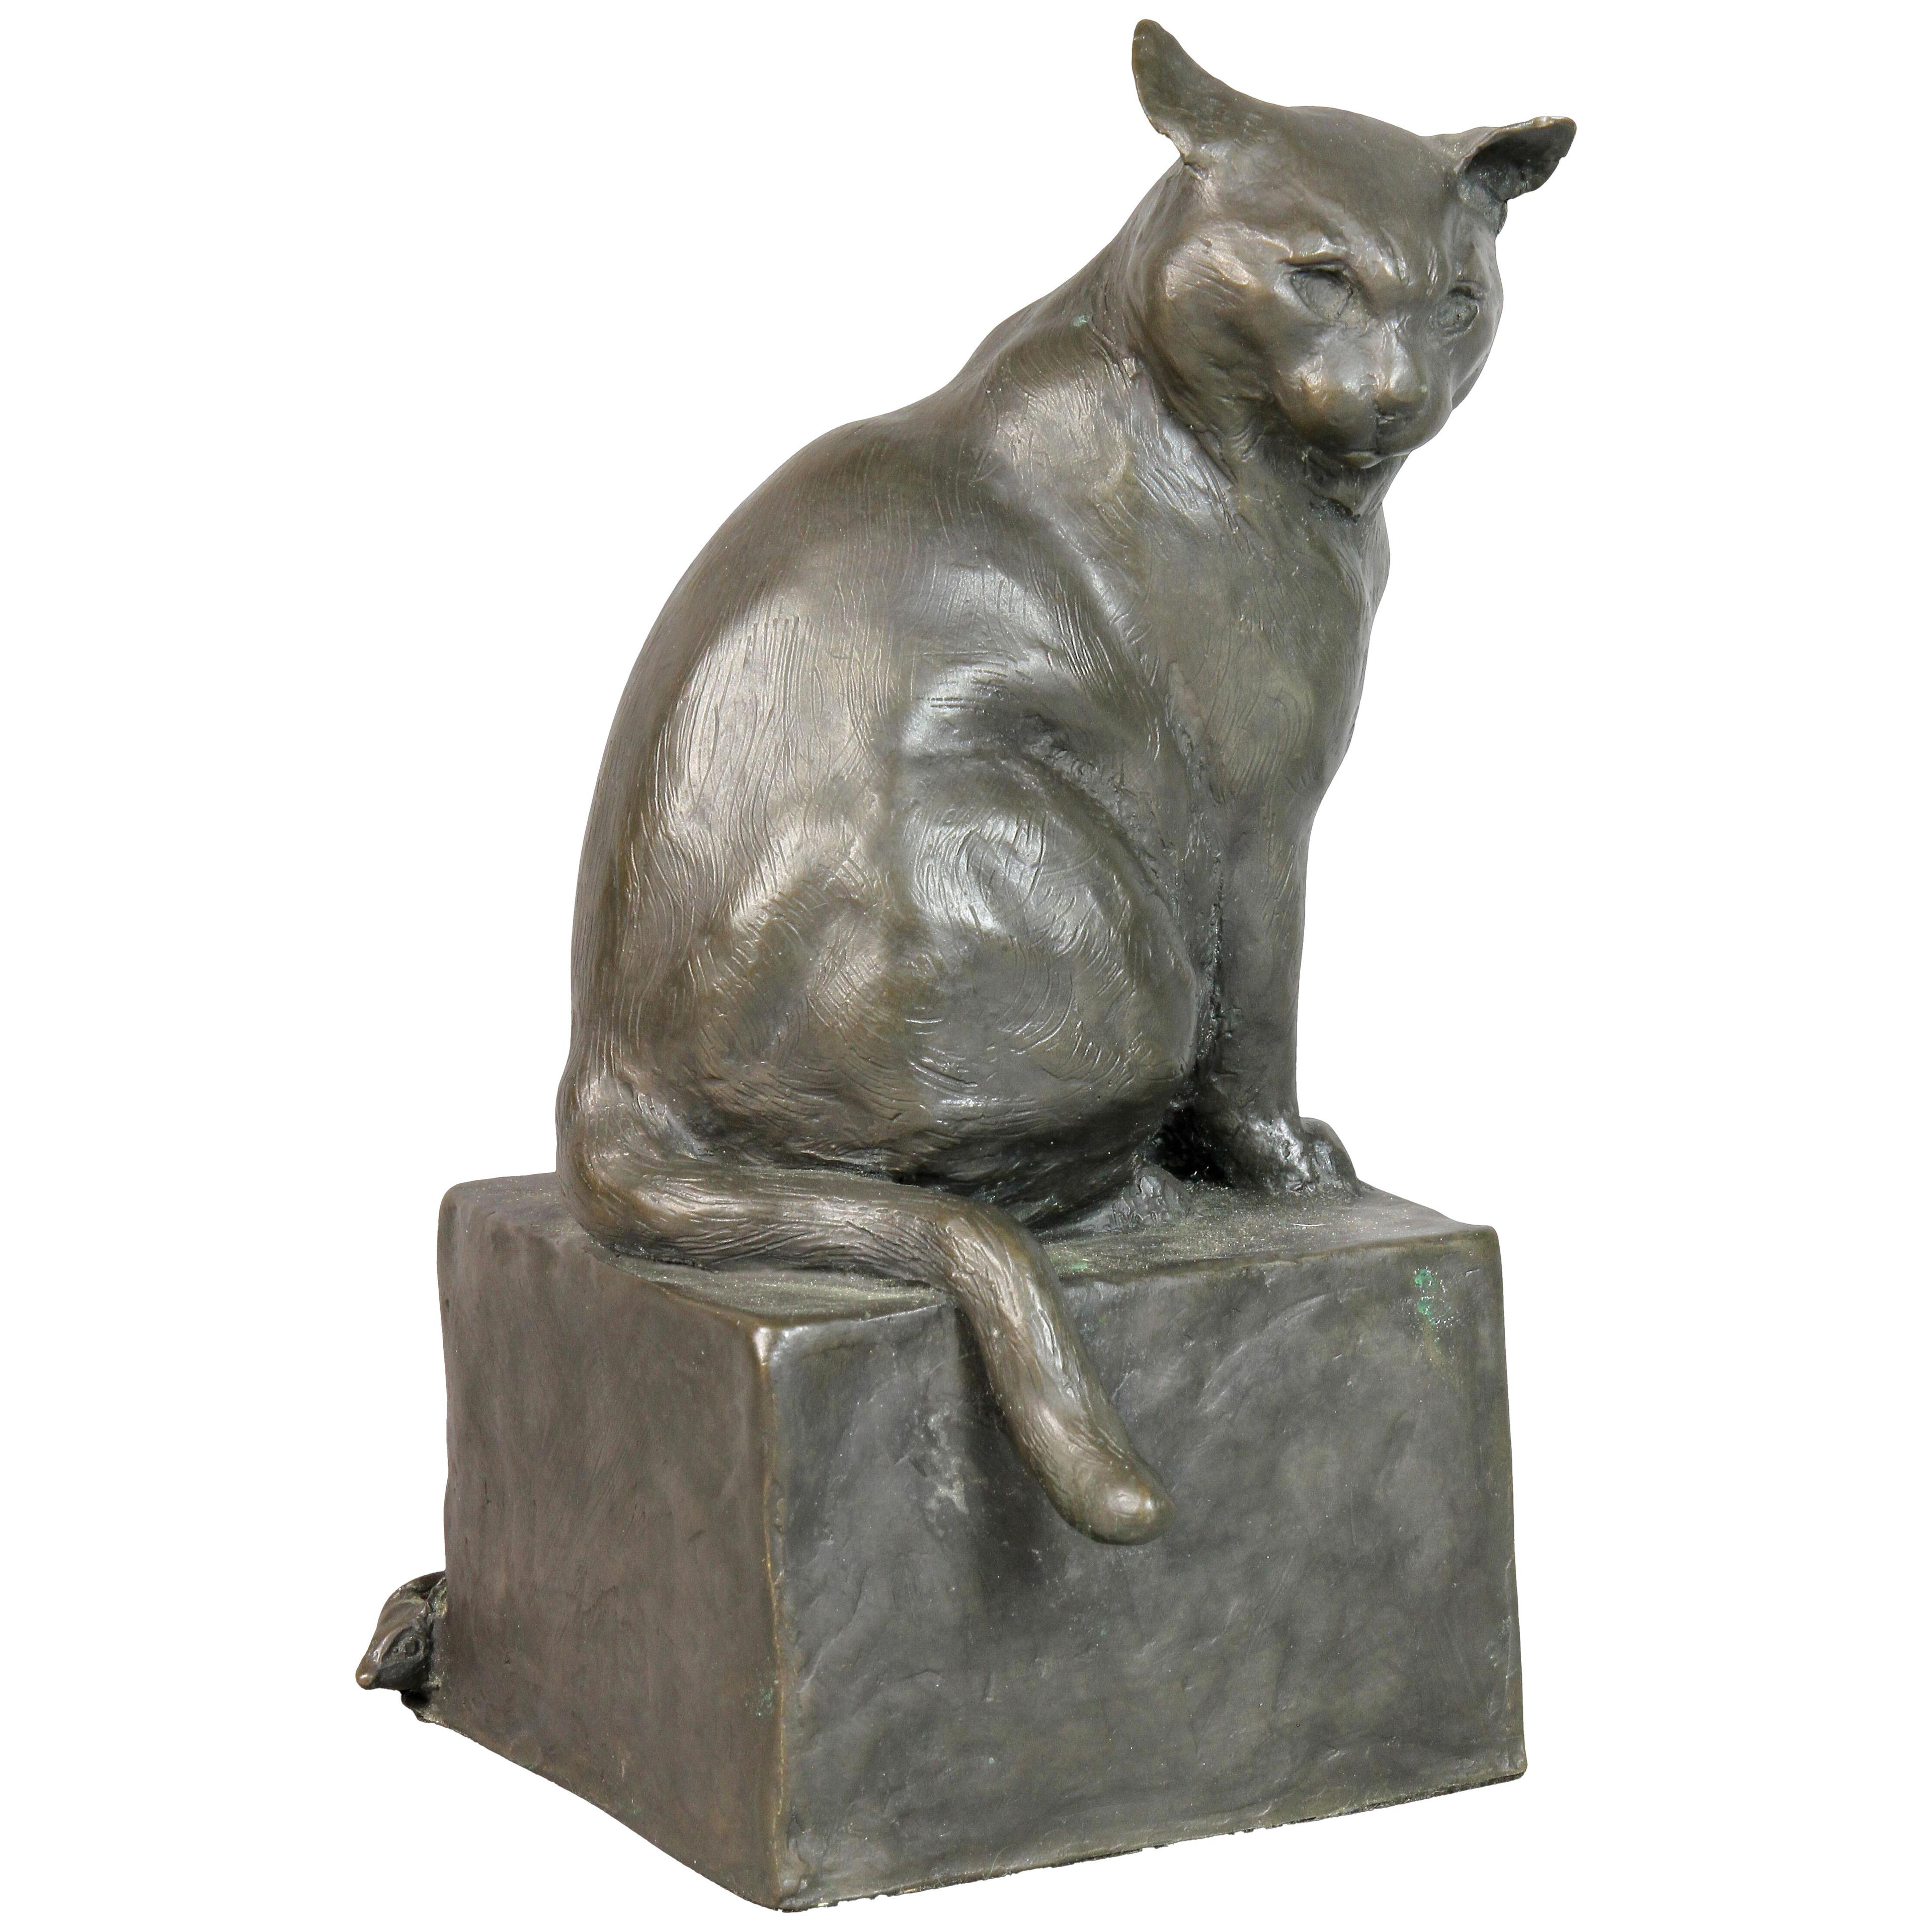 Bronze Figure of a Cat by e.m. Leary Strazzula